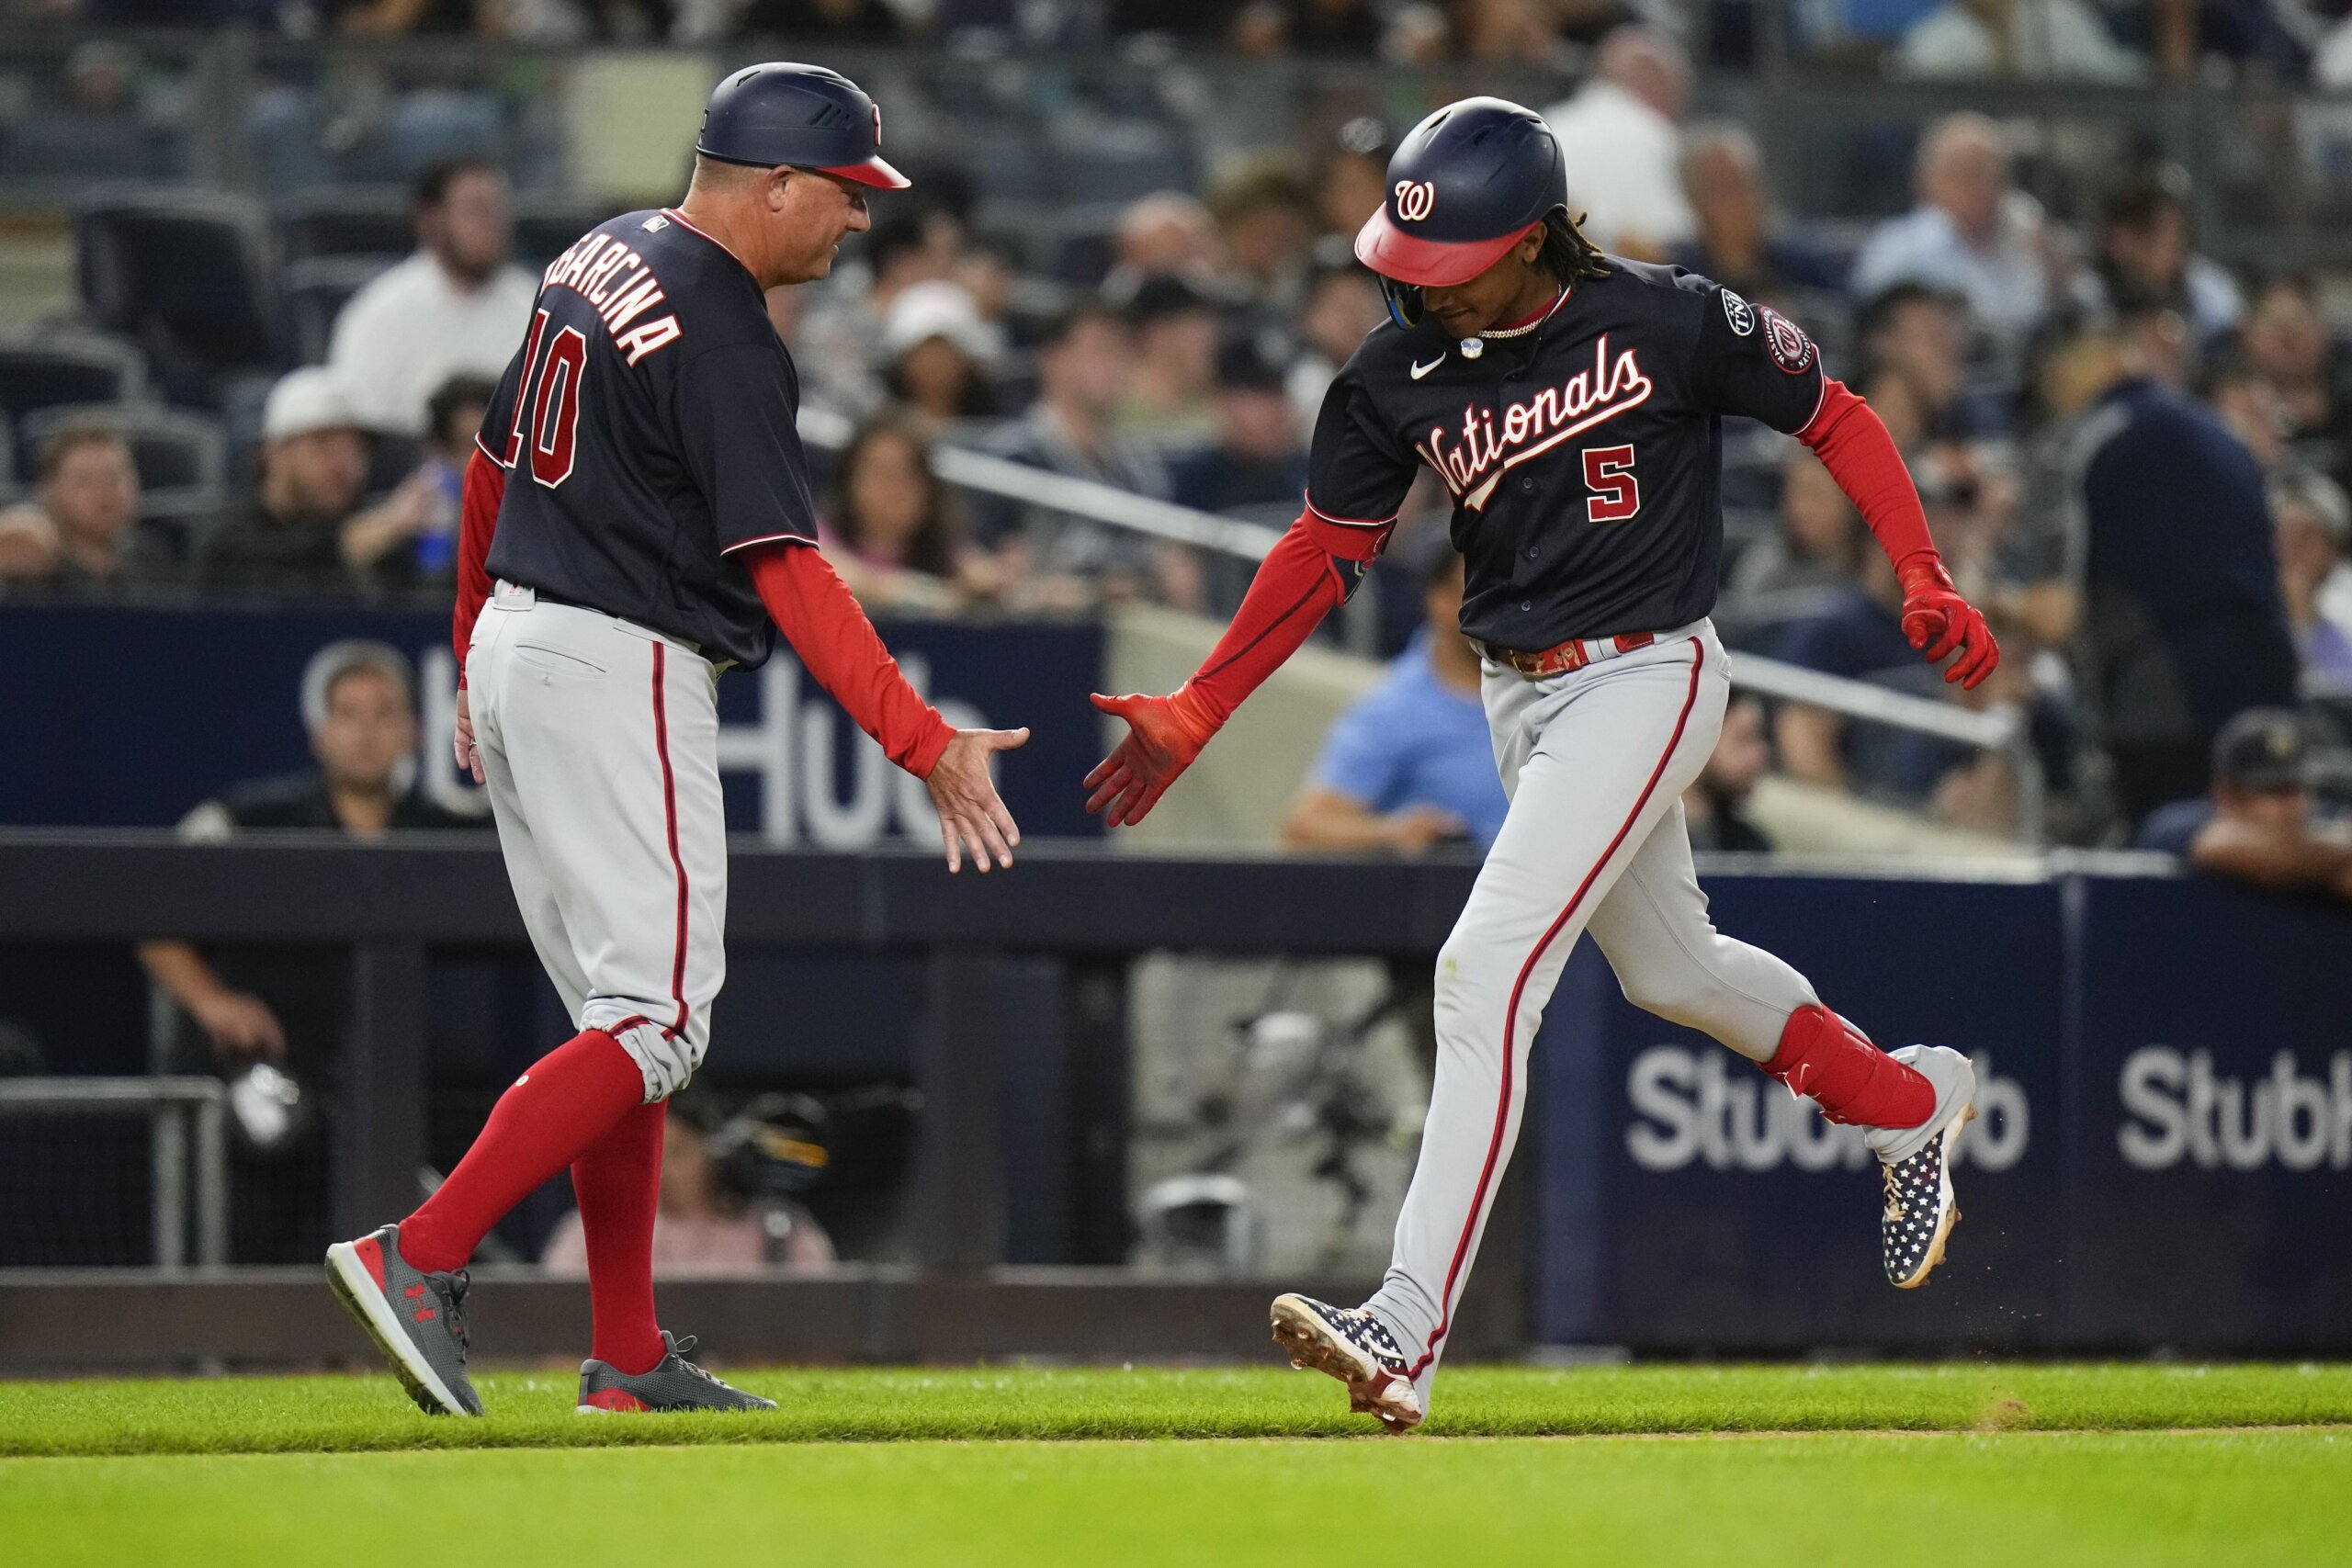 Washington Nationals 9-2 over New York Yankees for first win of